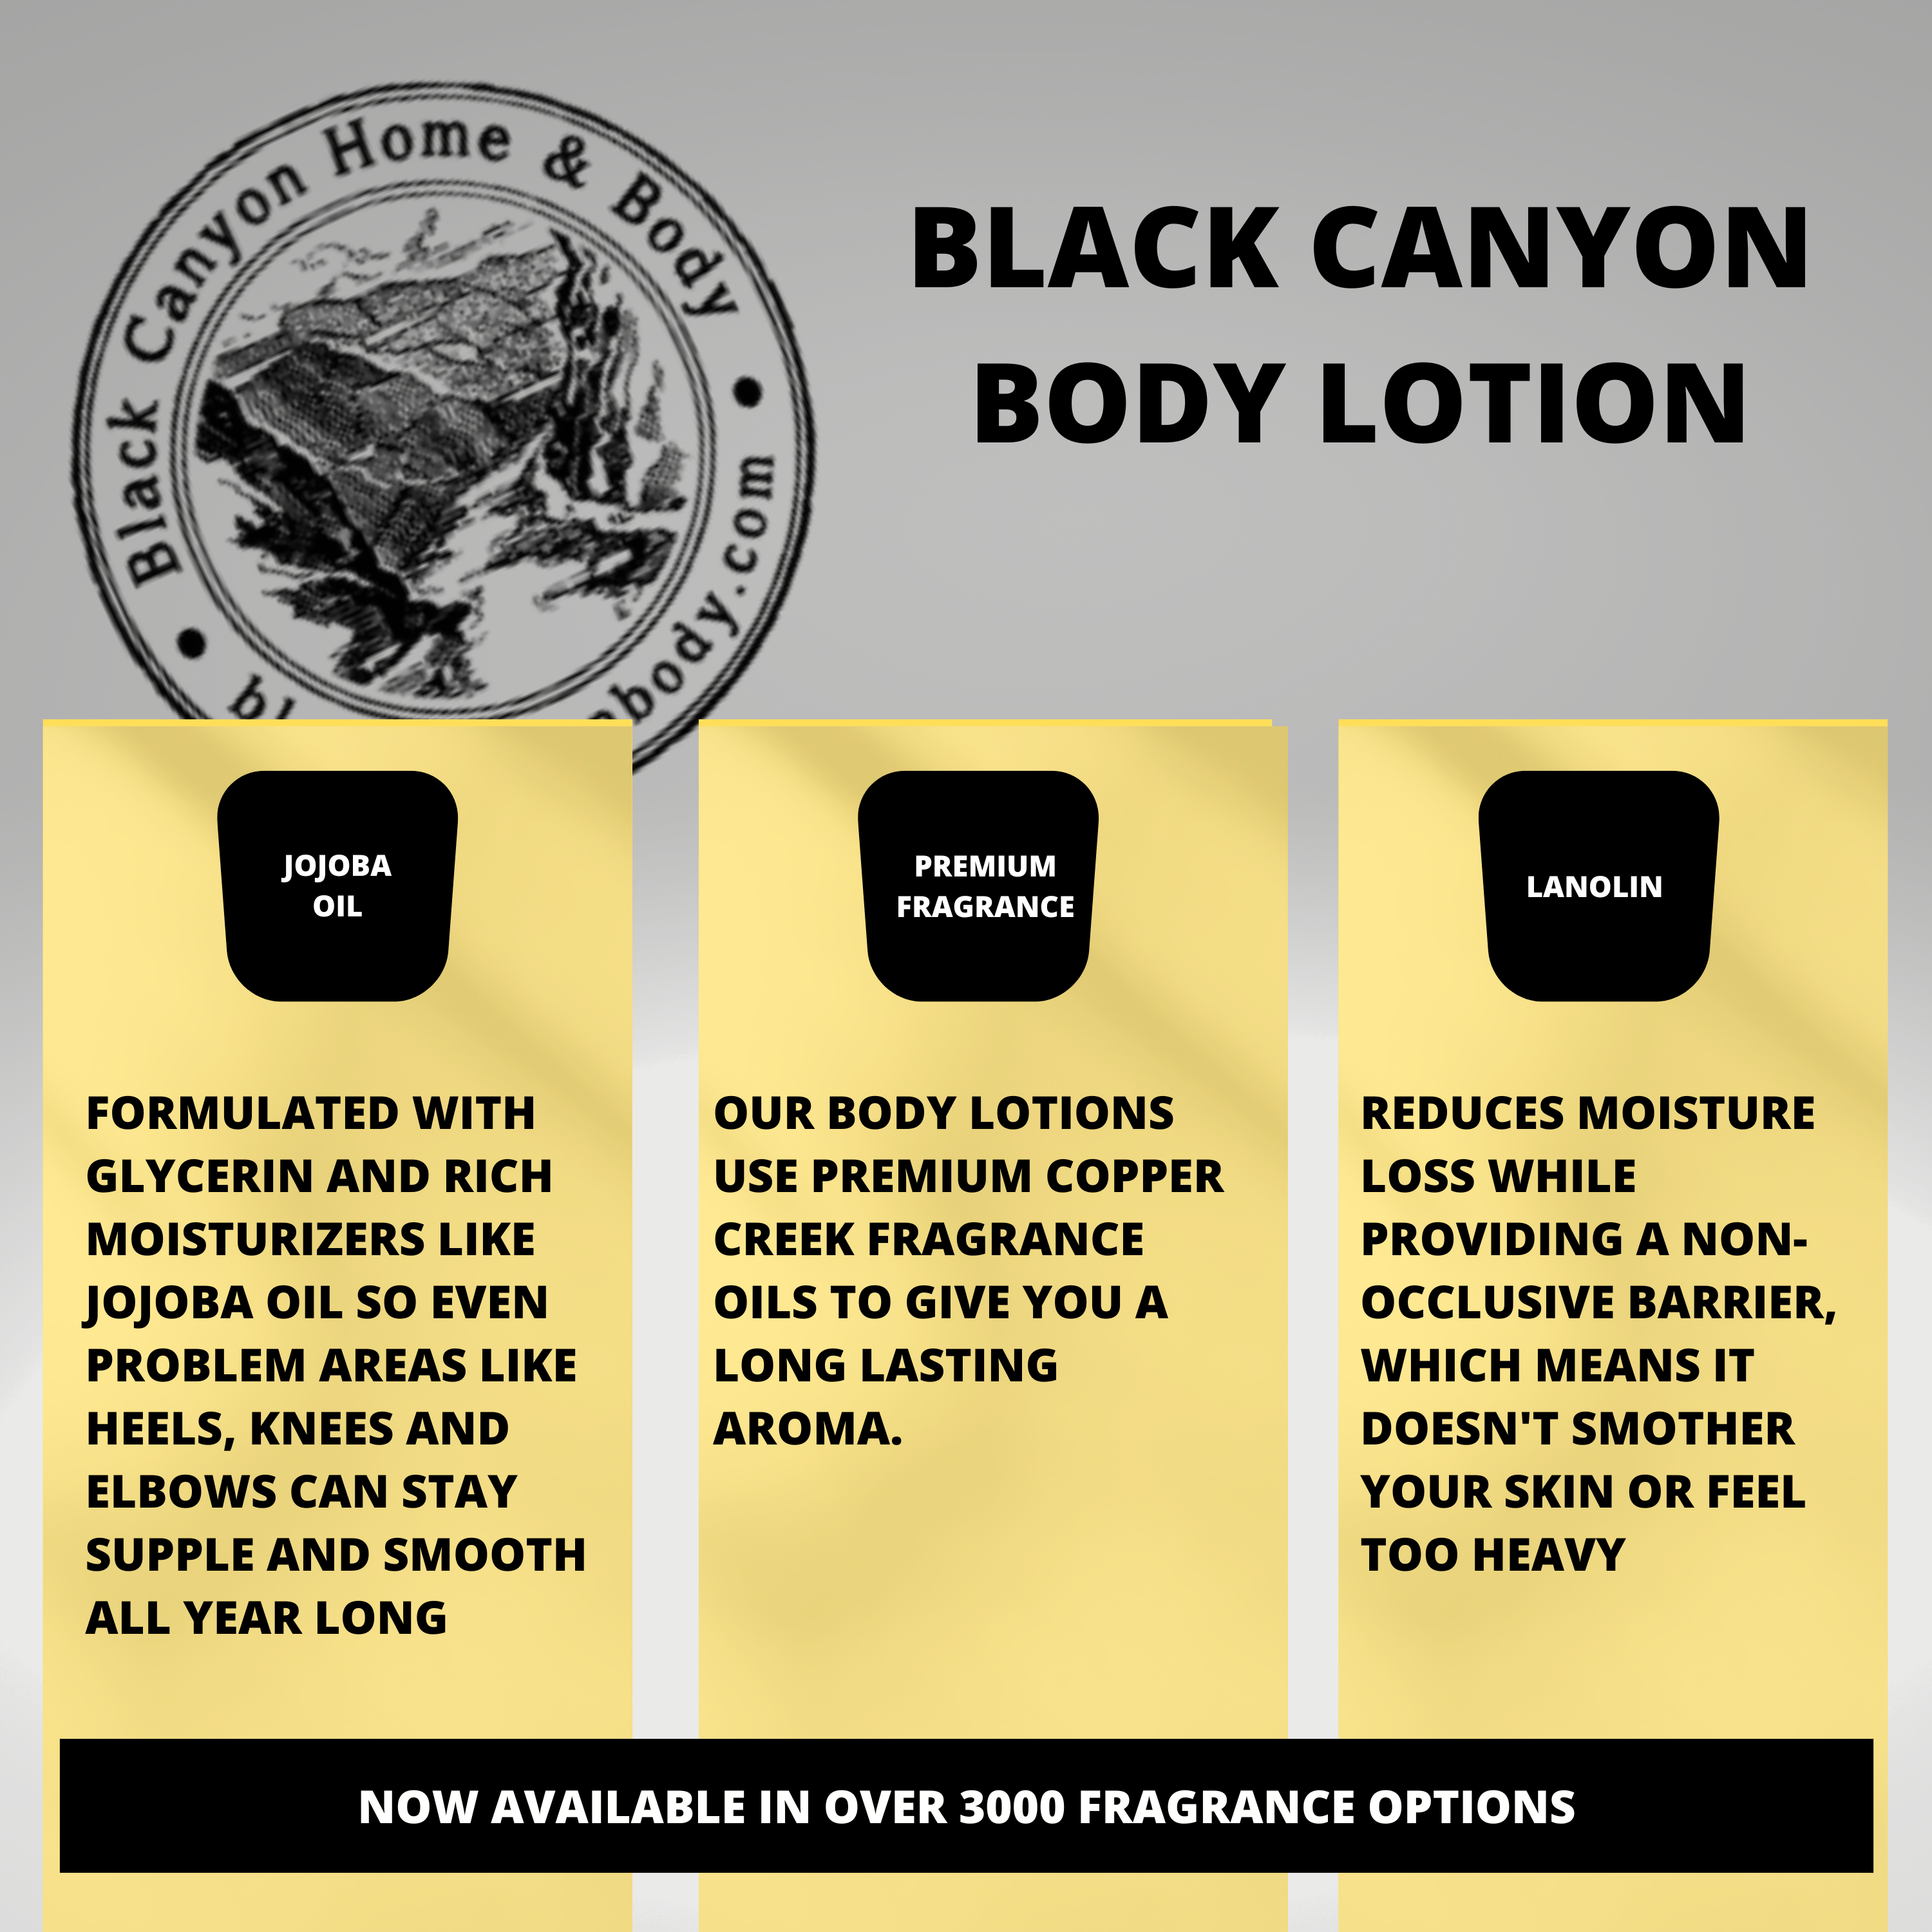 Black Canyon Christmas Day Scented Luxury Body Lotion with Lanolin and Jojoba Oil